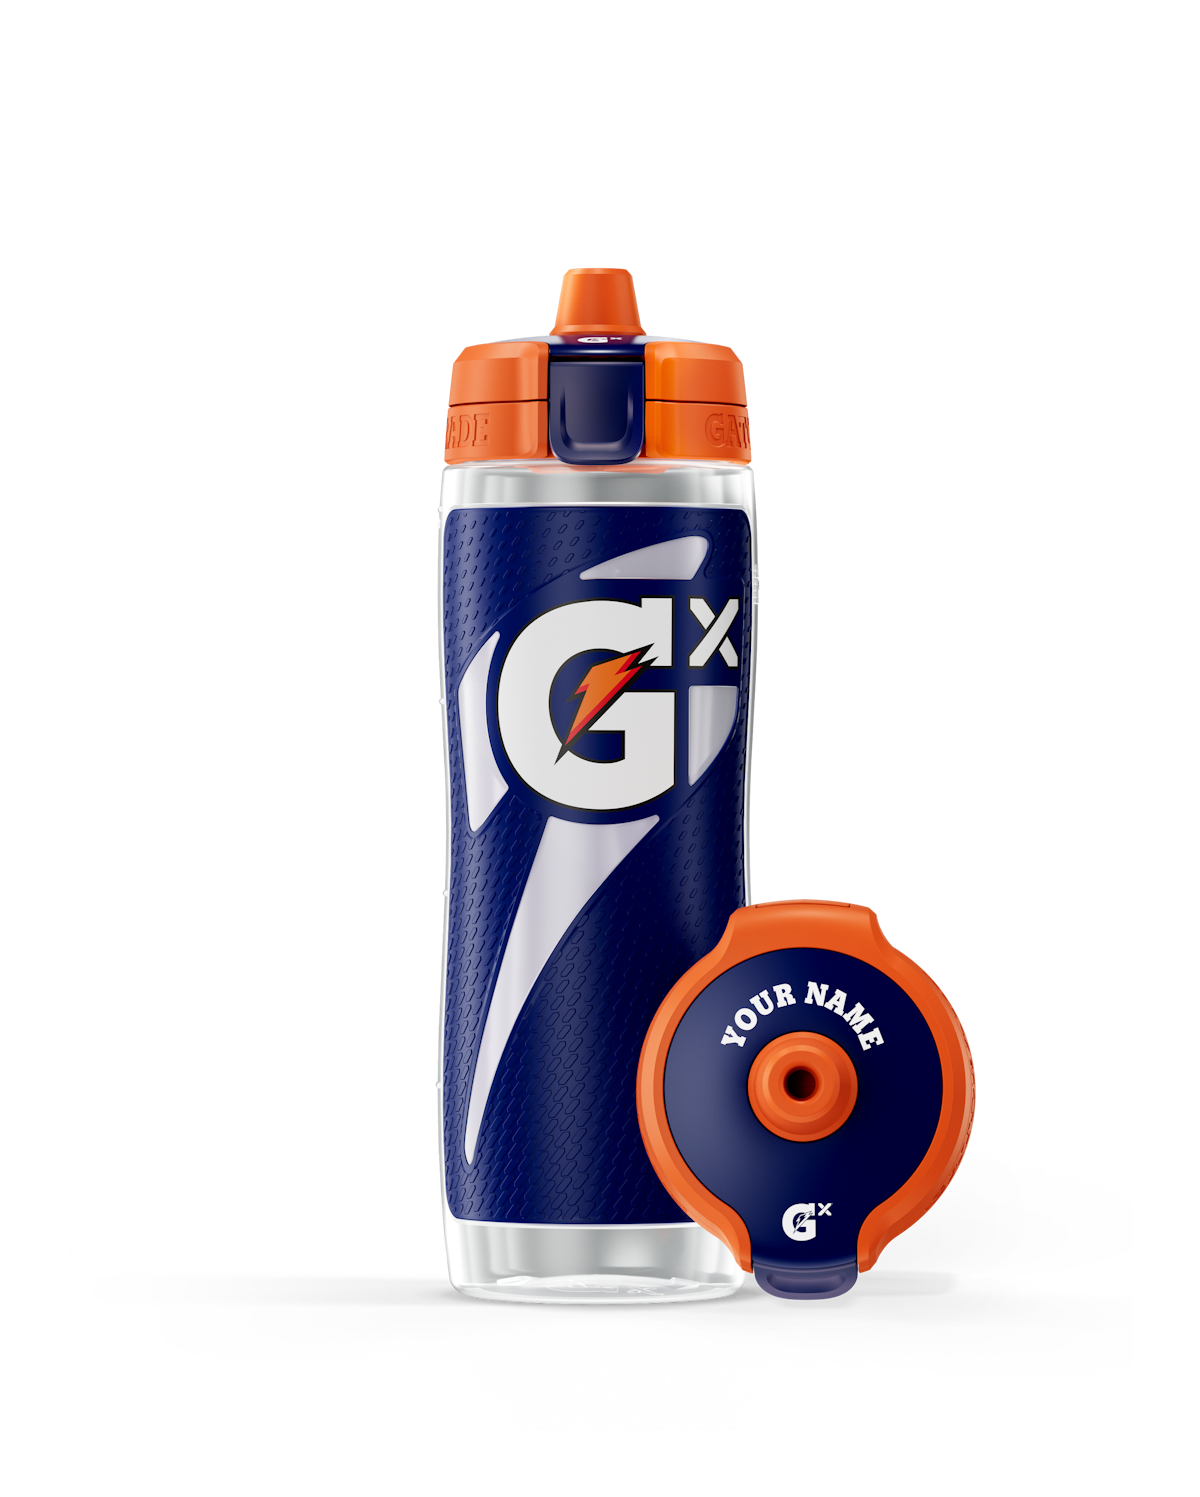 https://www.datocms-assets.com/101859/1691708672-00052000014754_gxsqueezebottle_navyblue_producttile_2680x3344.png?auto=format&fit=fill&w=1200&ar=4%3A3&fill=solid